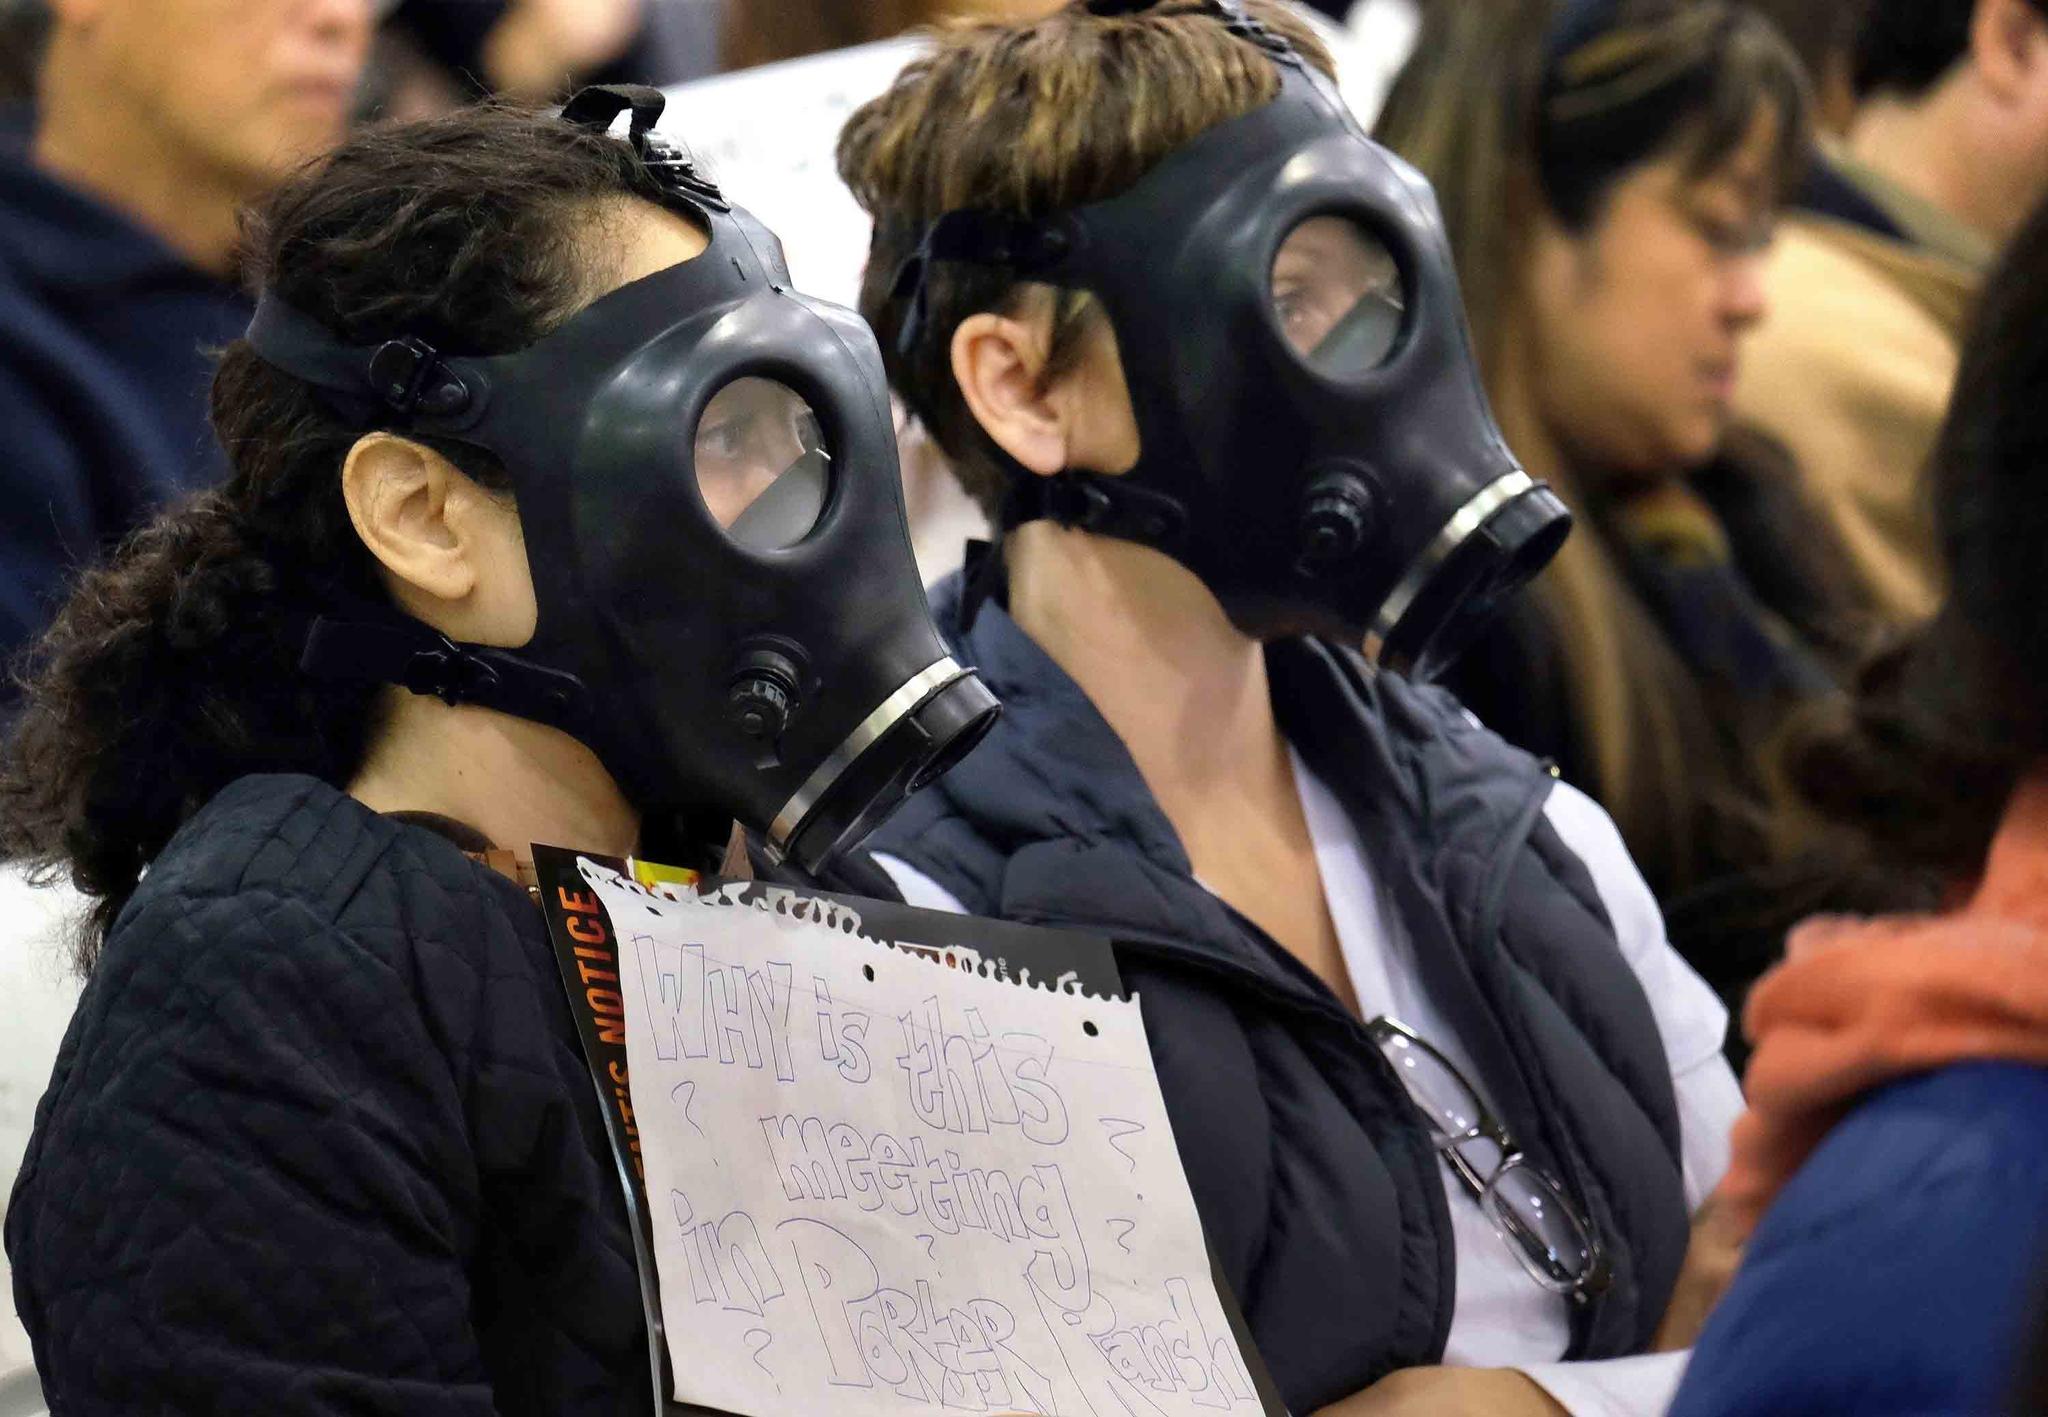 In this Jan. 16, 2016, file photo, protesters wearing gas masks, attend a hearing over a gas leak at the southern California Gas Company's Aliso Canyon Storage Facility near the Porter Ranch section of Los Angeles.